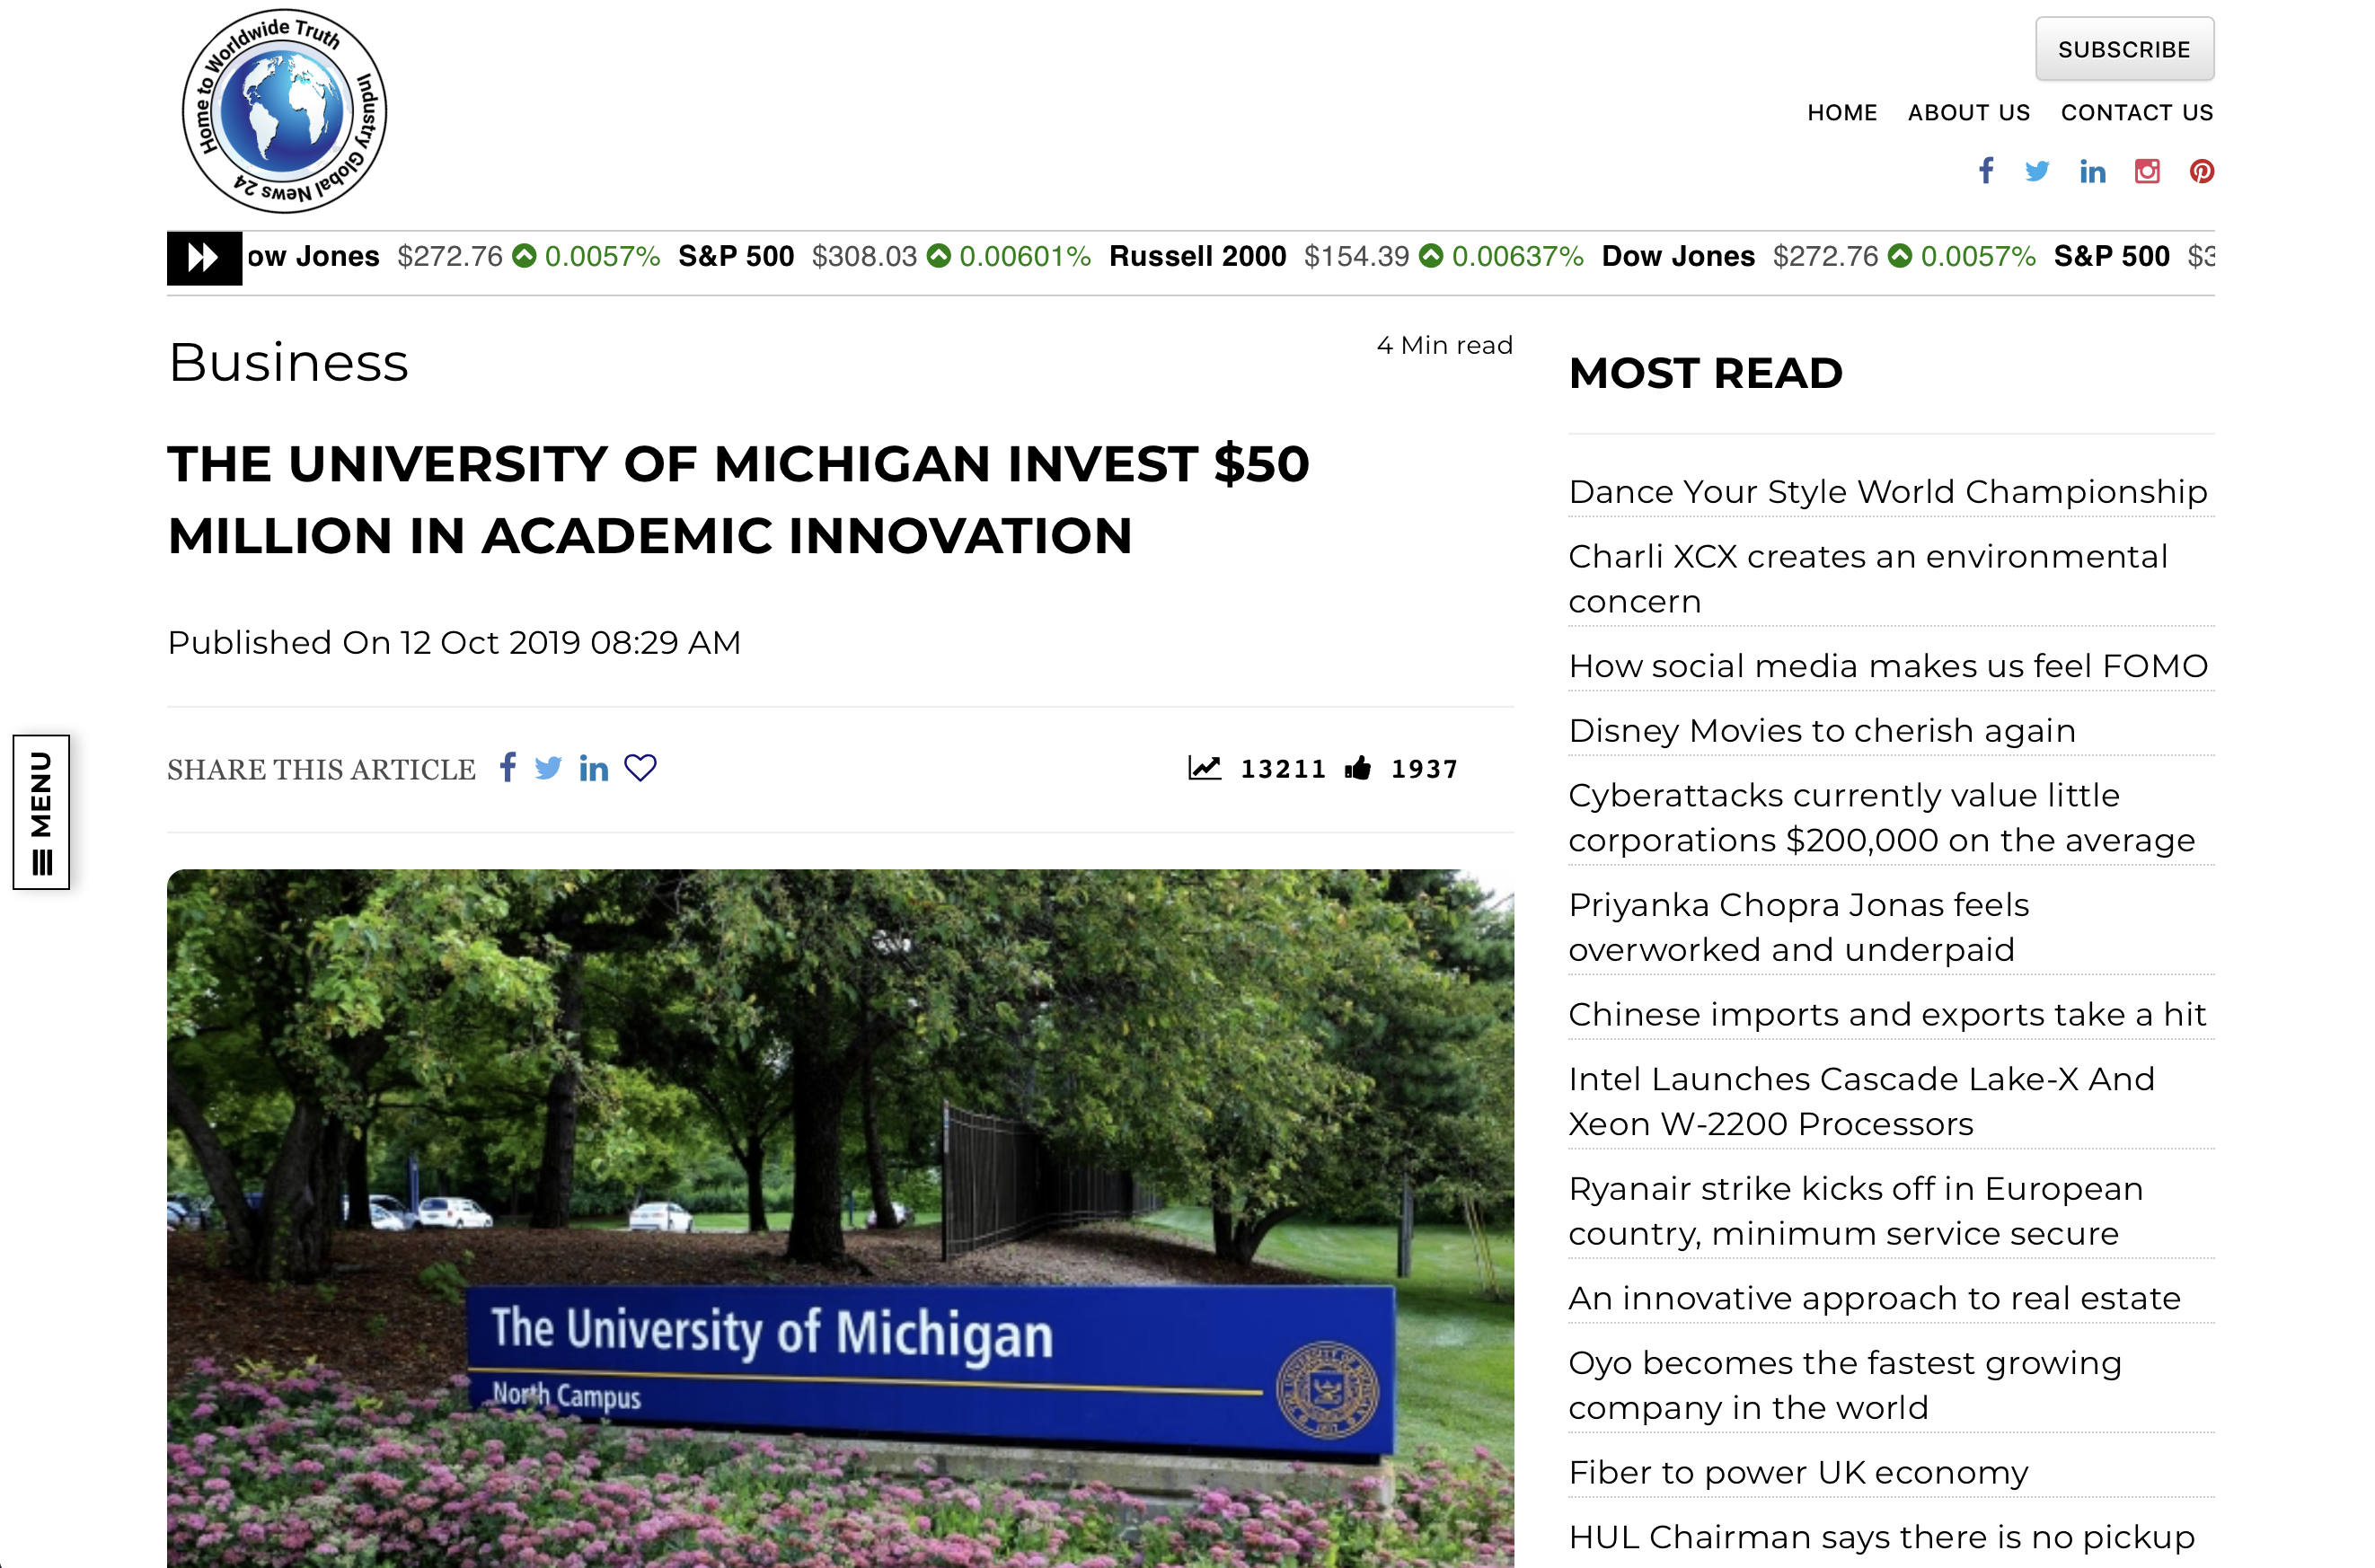 The University of Michigan Invest $50 Million in Academic Innovation